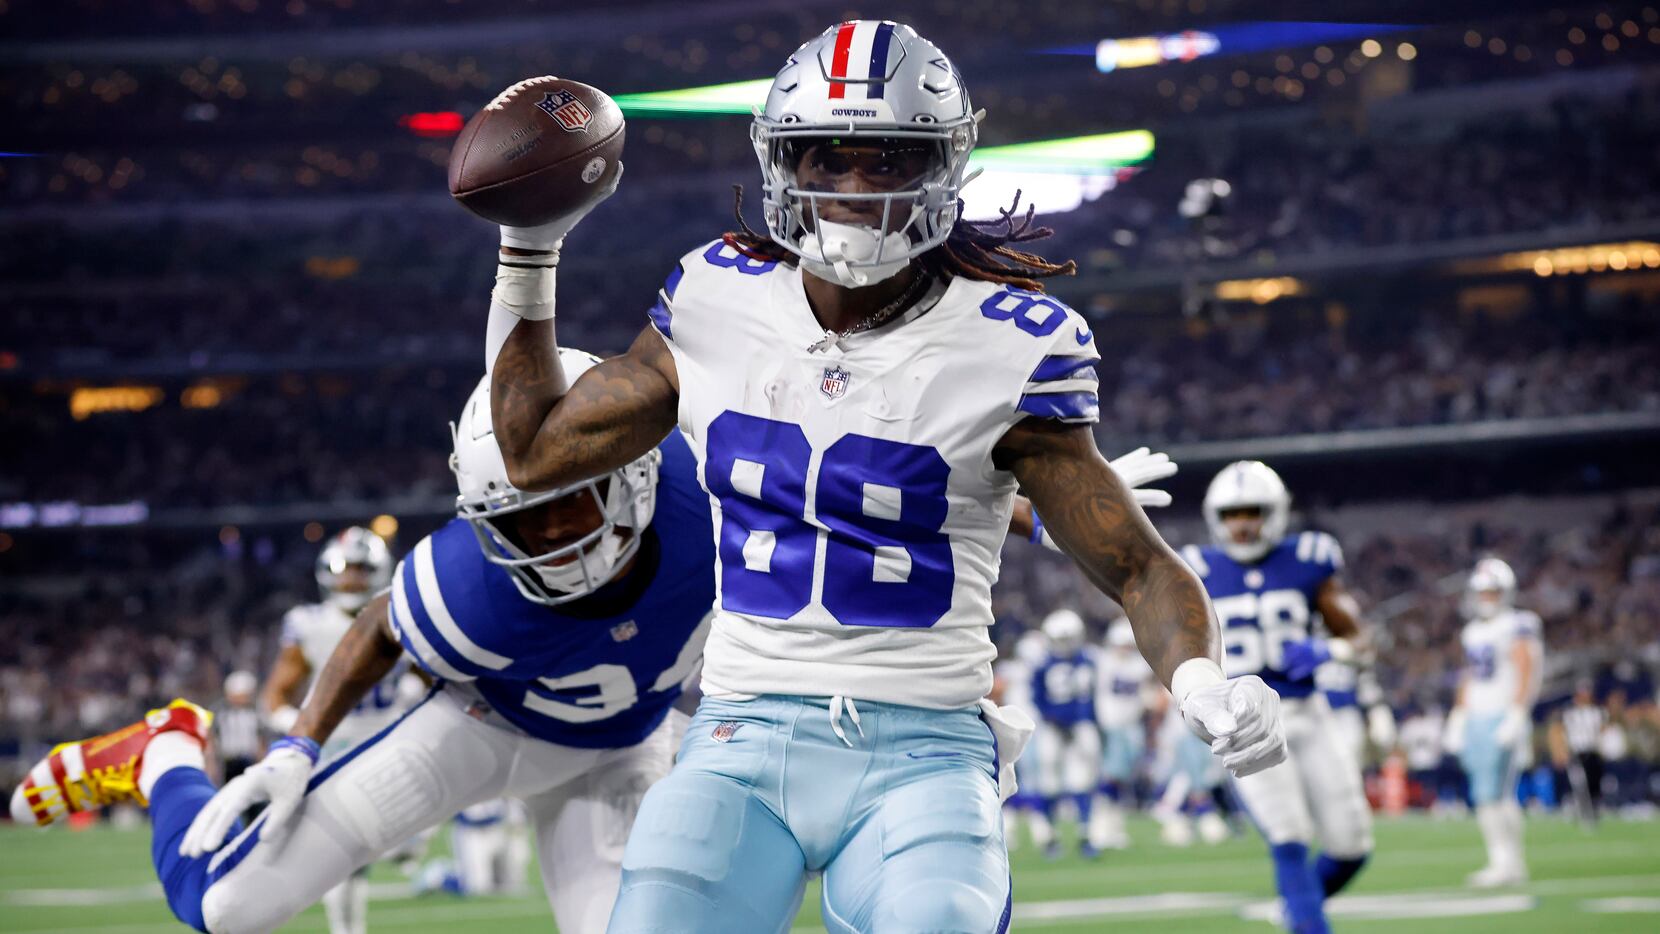 By trading Amari Cooper, Cowboys allowed CeeDee Lamb to grow into a true  No. 1 WR